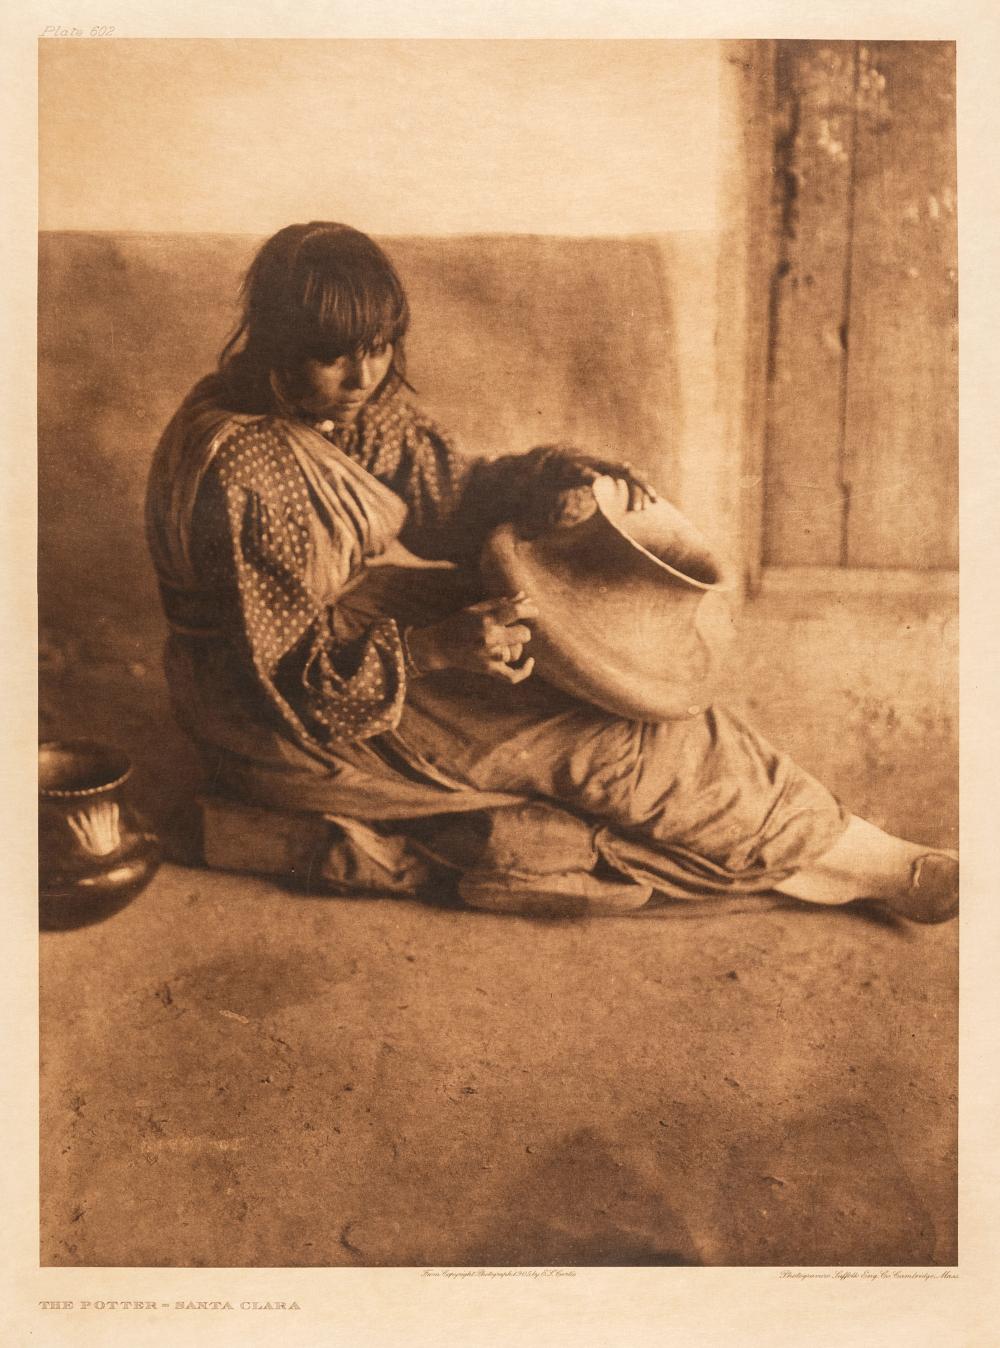 EDWARD S. CURTIS, THE POTTER -